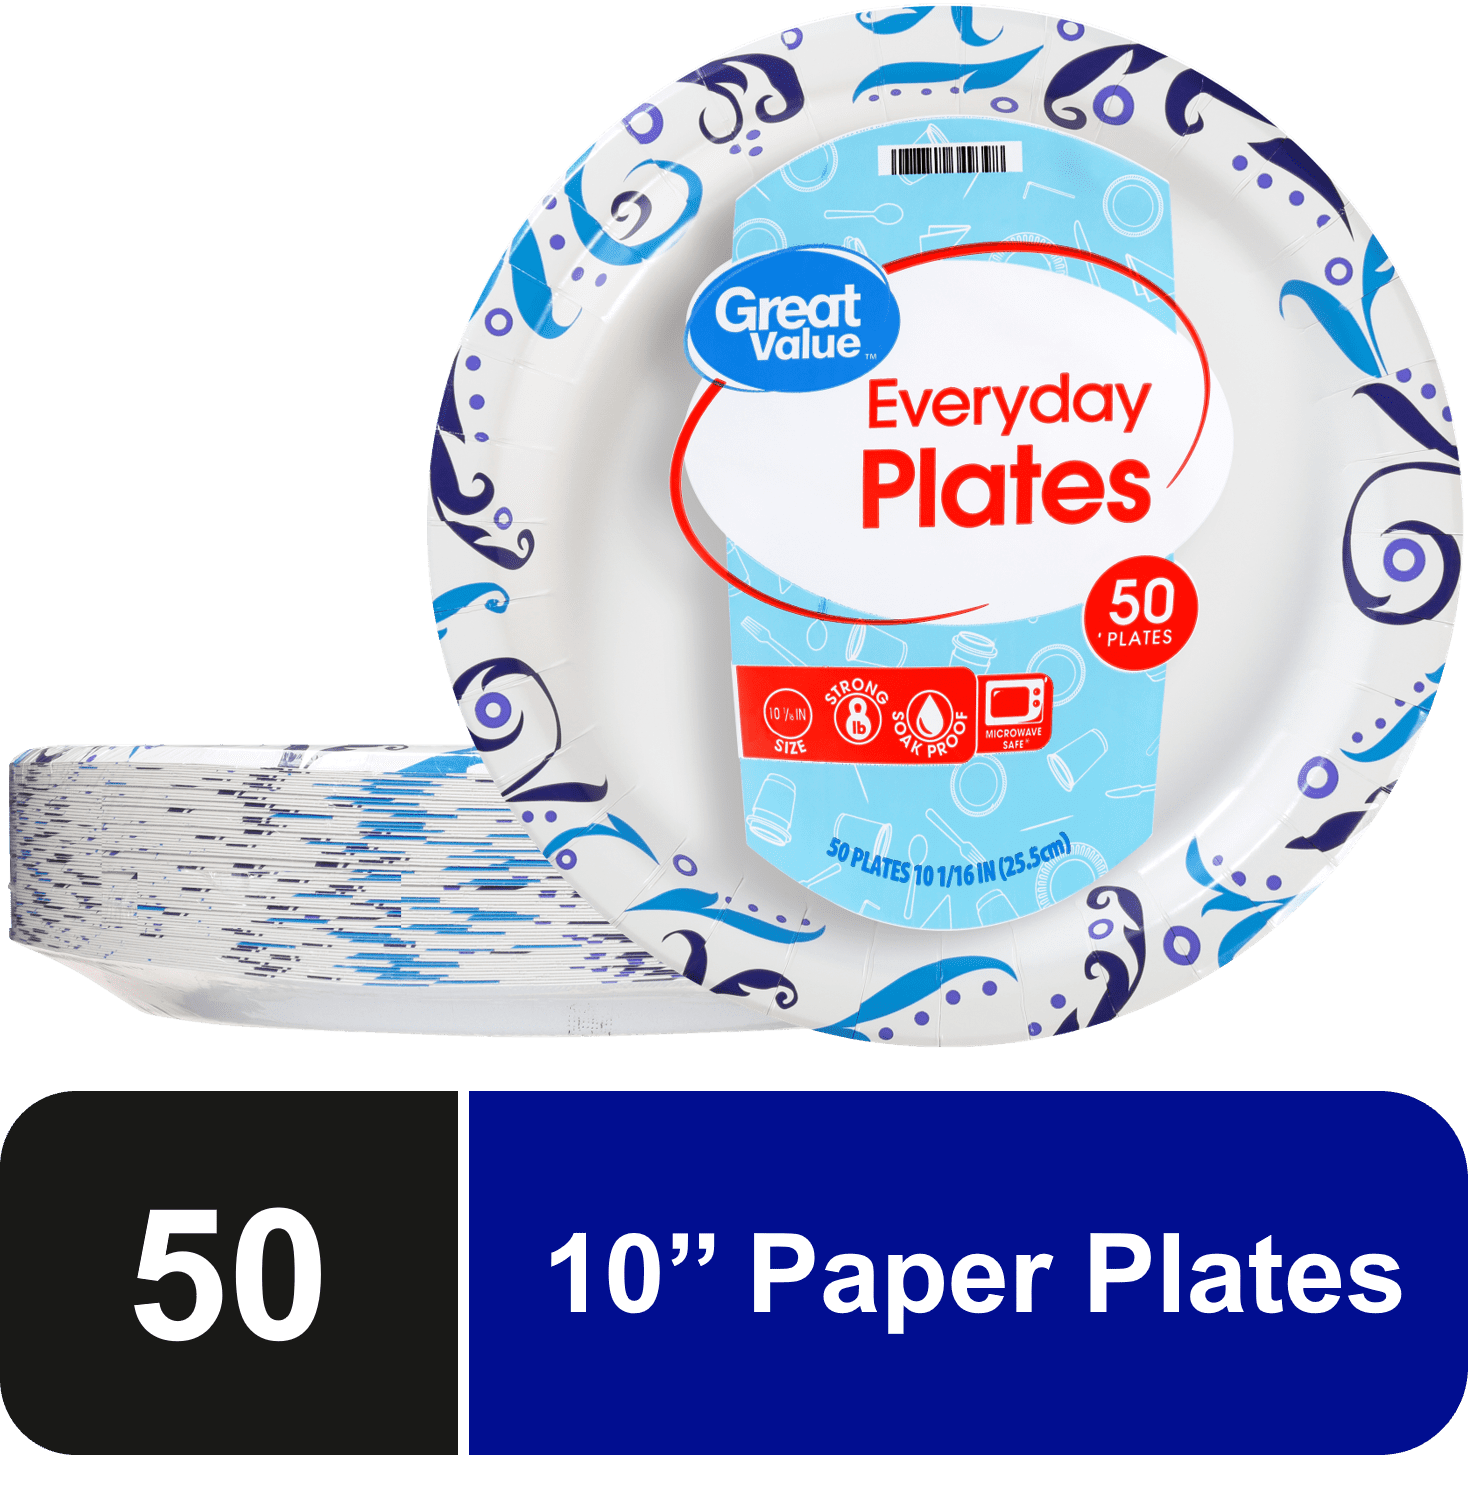 Simply Value - Simply Value, Paper Plates, 9 Inch (50 count)